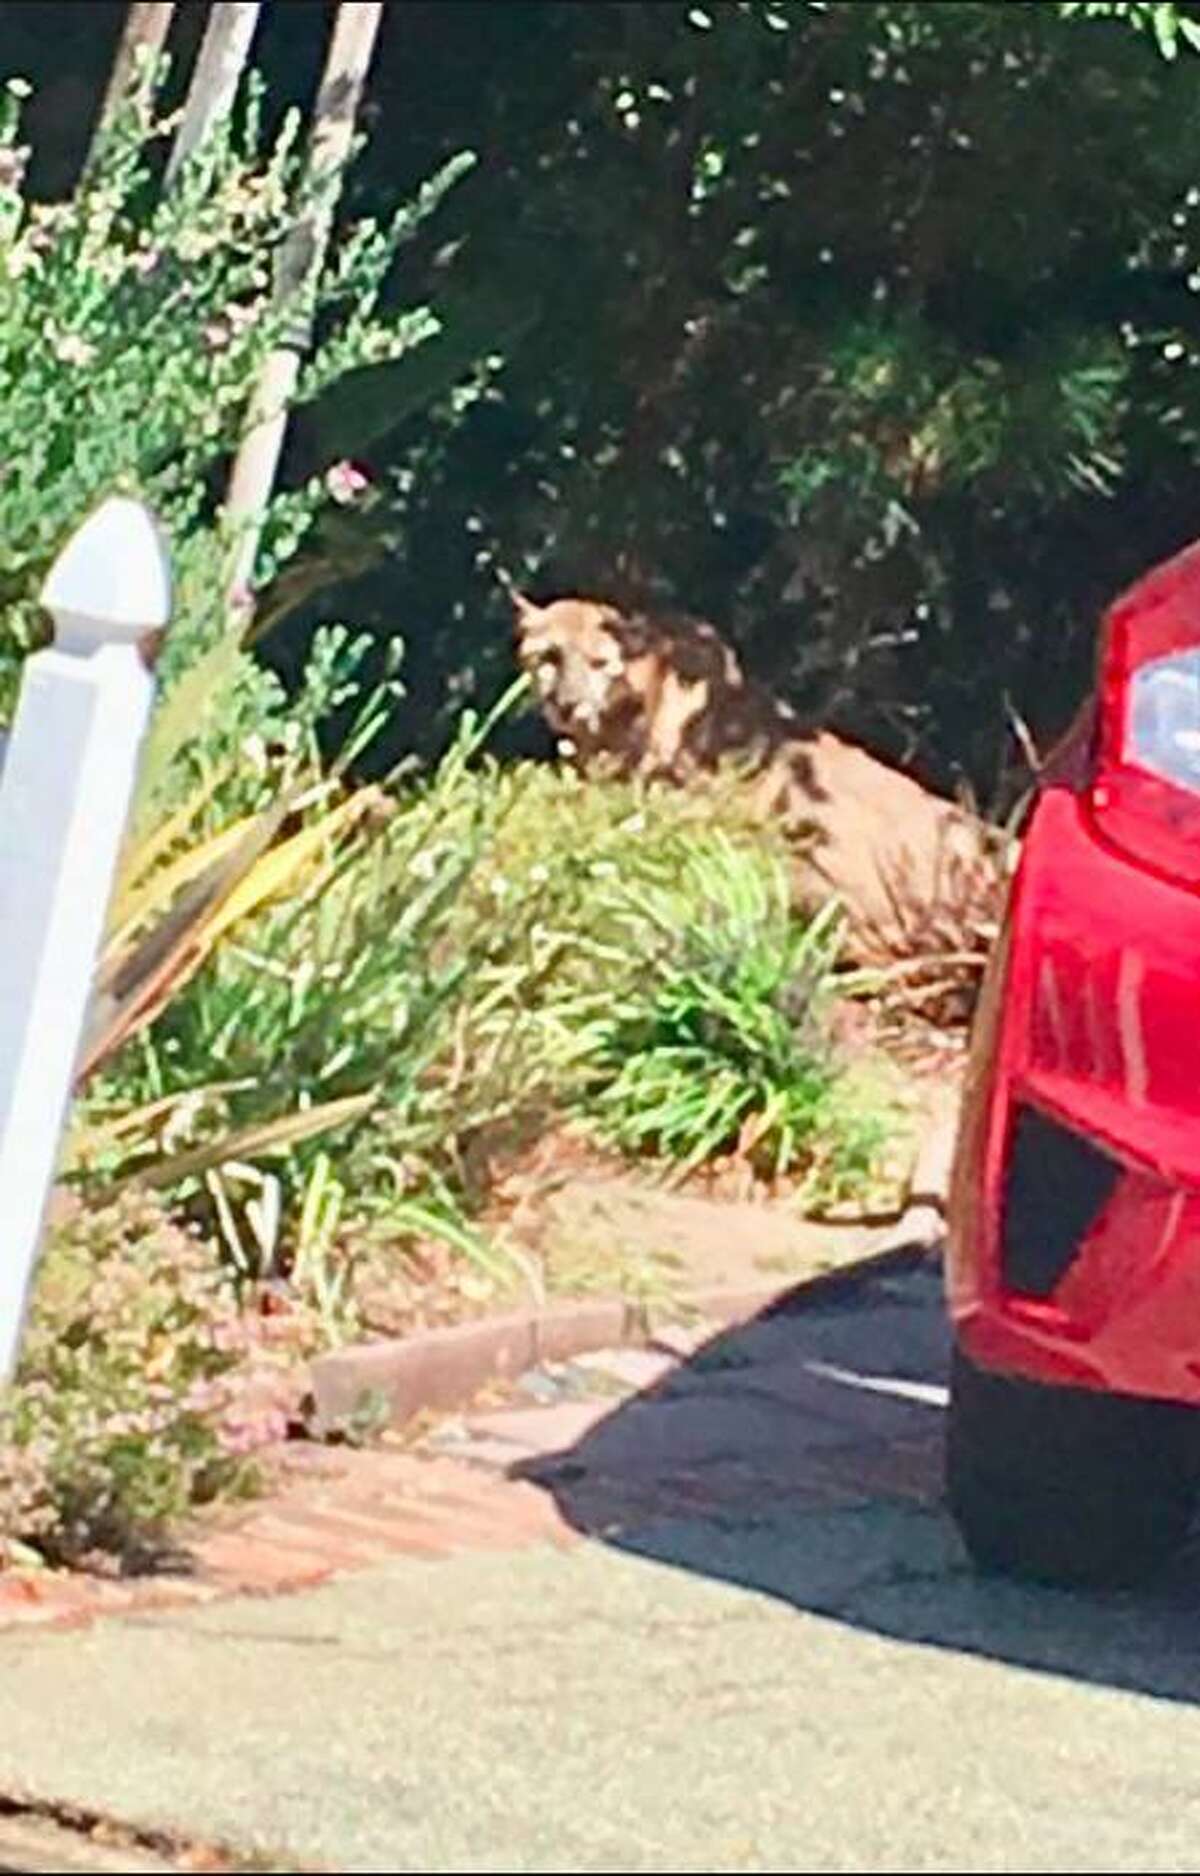 A mountain lion was spotted walking around the backyard of a San Mateo home Monday morning and after almost a full day of attempting to safely corral the puma, wildlife officials successfully tranquilized it, authorities said on July 16, 2018.